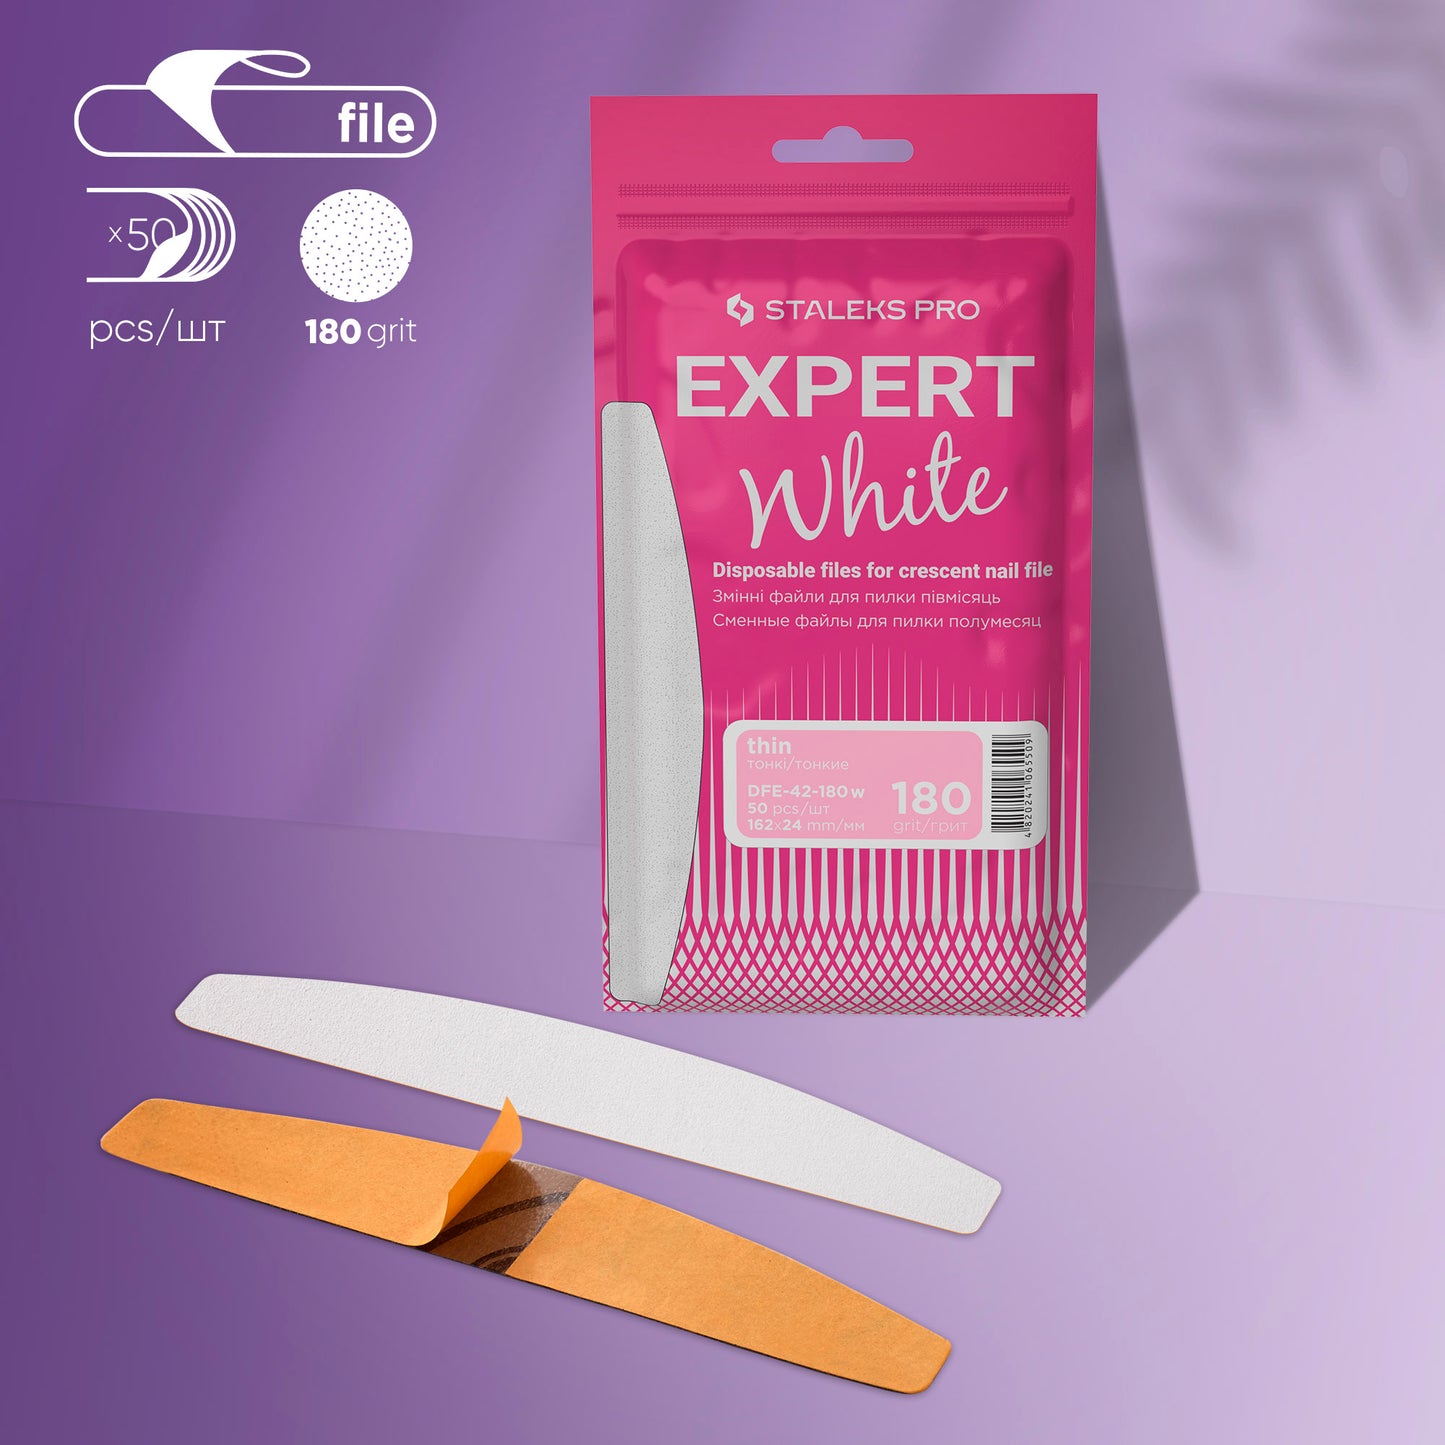 STALEKS PRO EXPERT 42 (White Thin) REFILL PADS for CRESCENT FILE 180 GRIT, 50pc